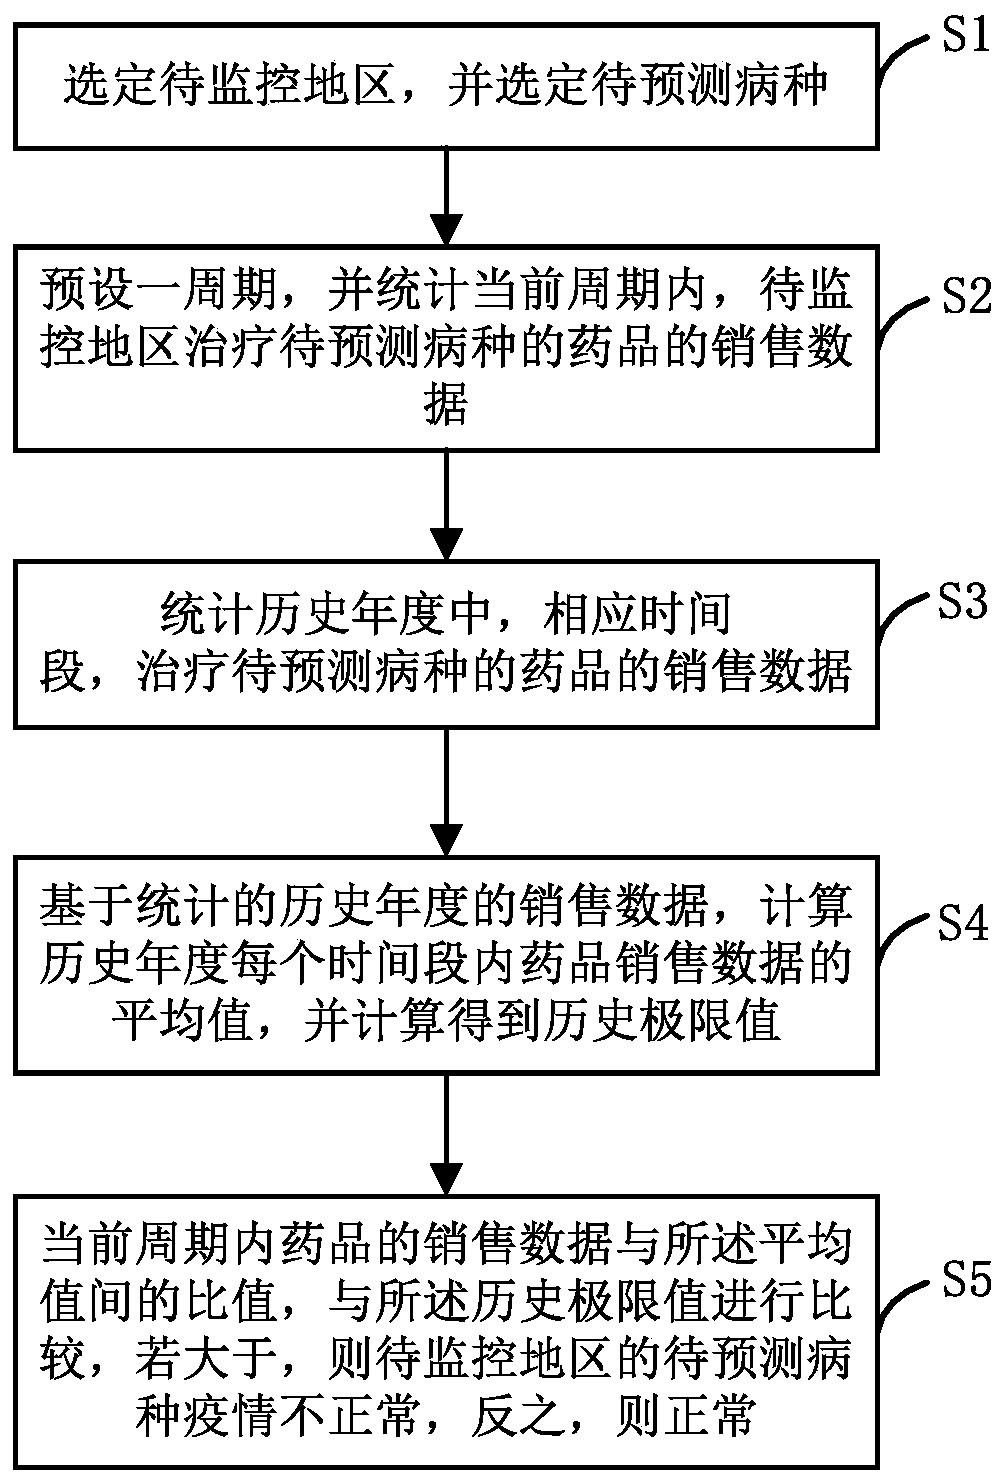 Infectious disease monitoring method and system based on drug selling data